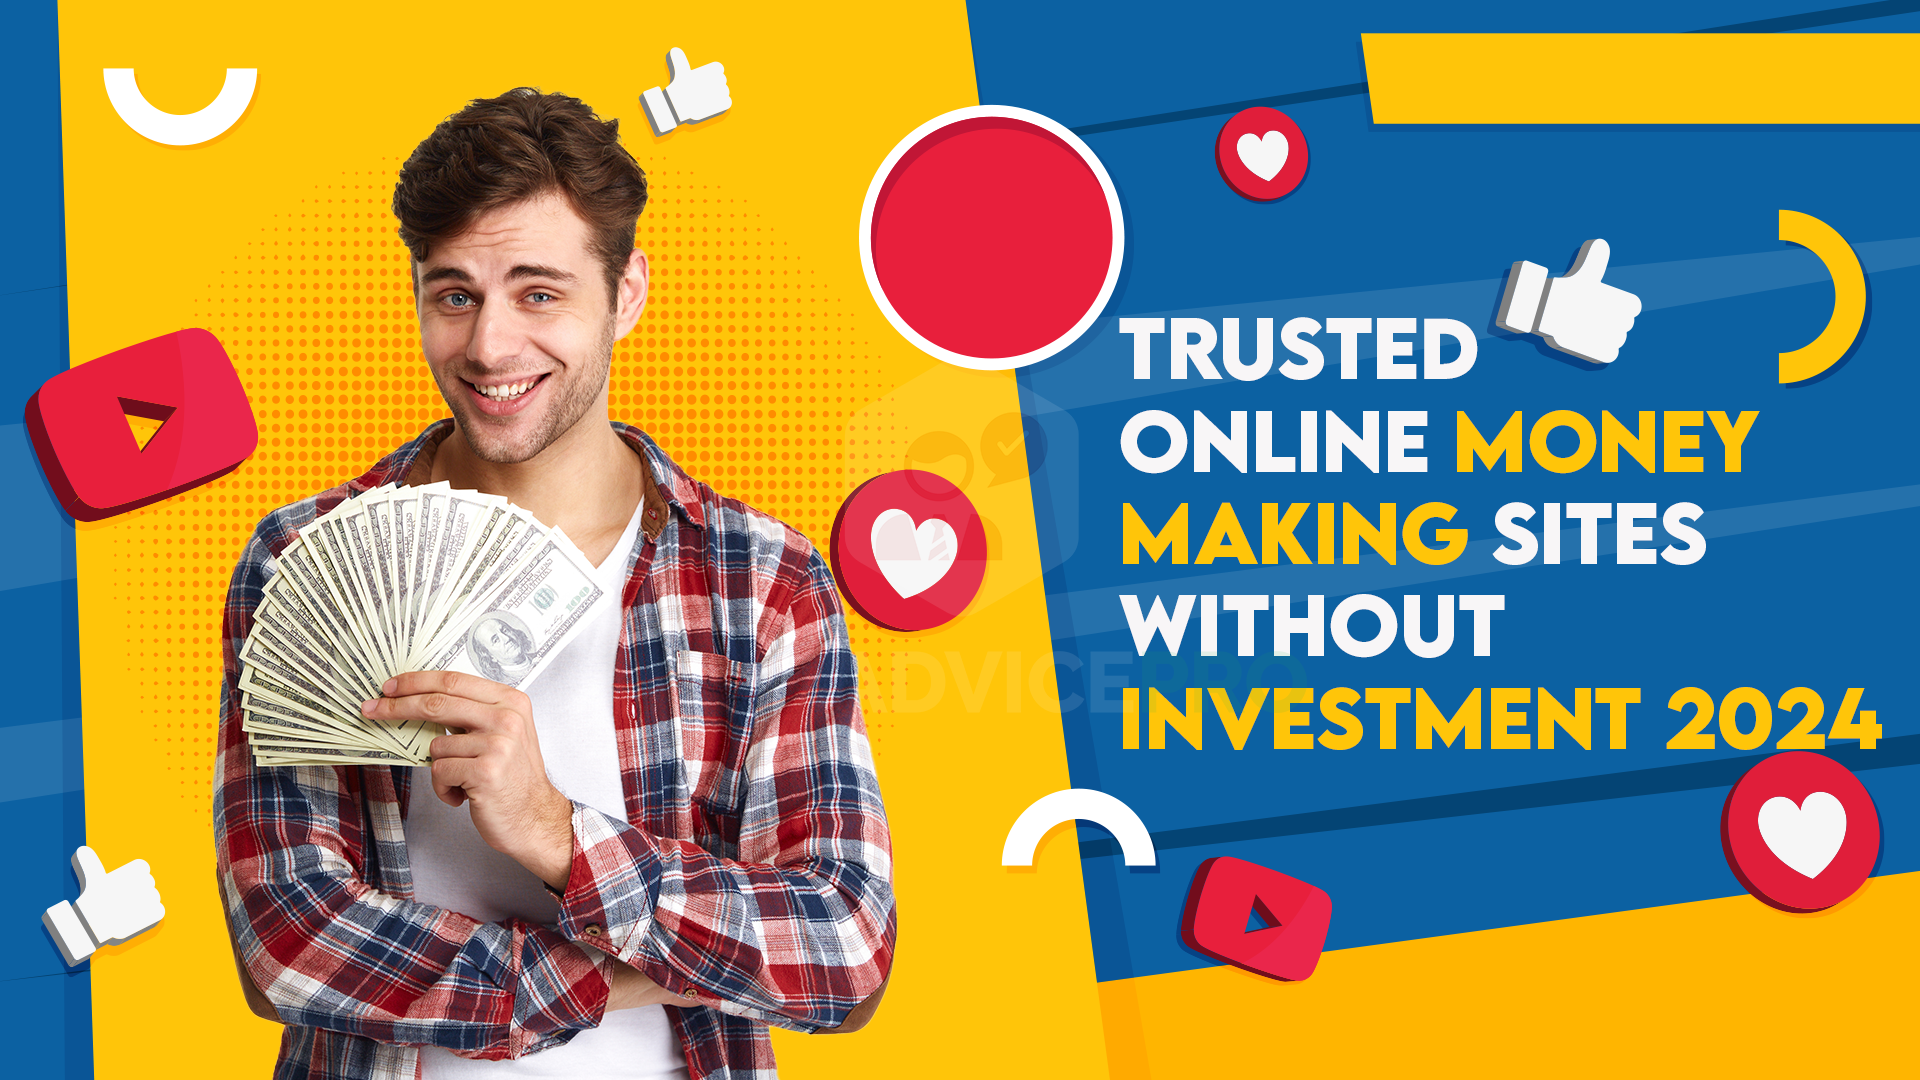 Trusted online money making sites without investment 2024